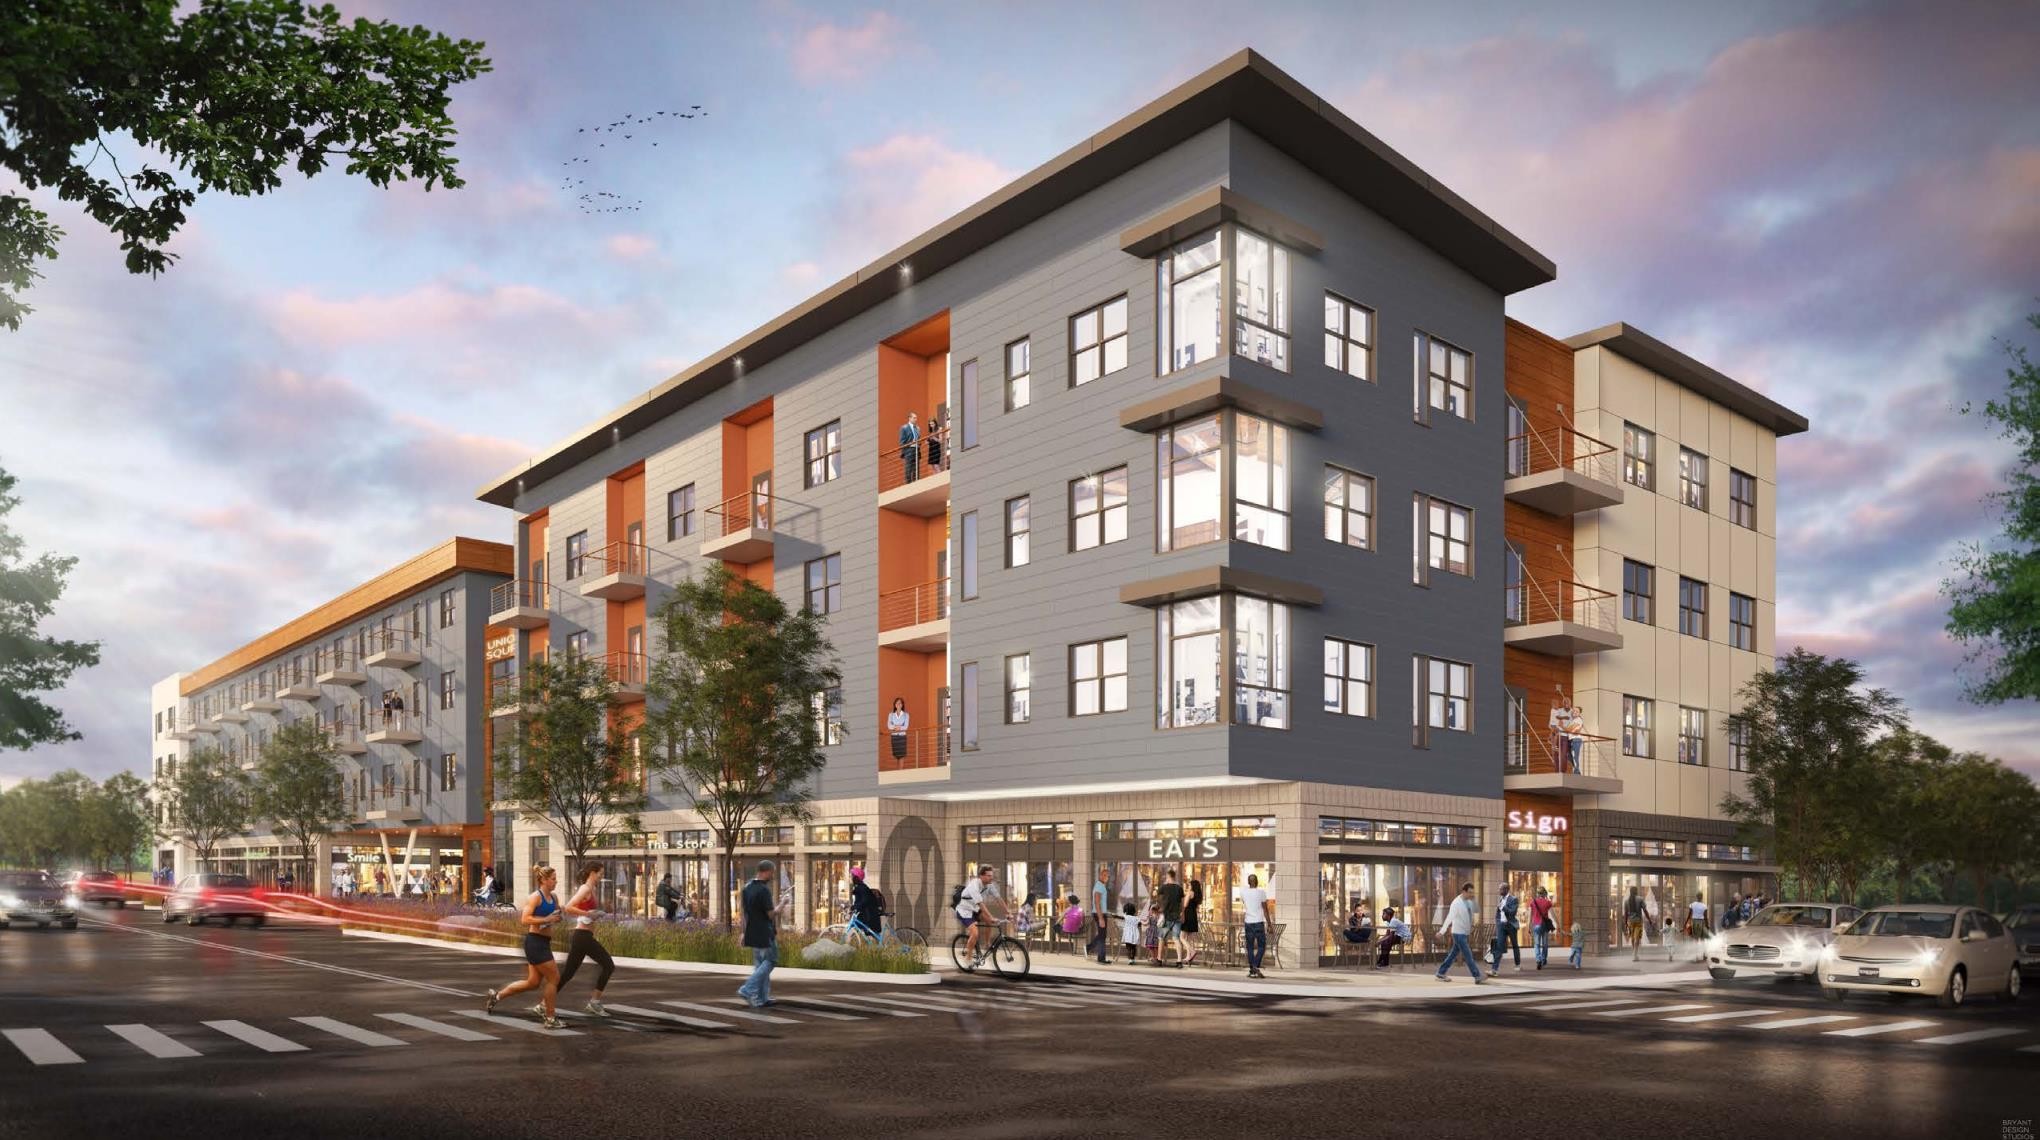 Home Leasing wants to build a 66-unit apartment building on a key parcel of the former Inner Loop. - SWBR ARCHITECTS